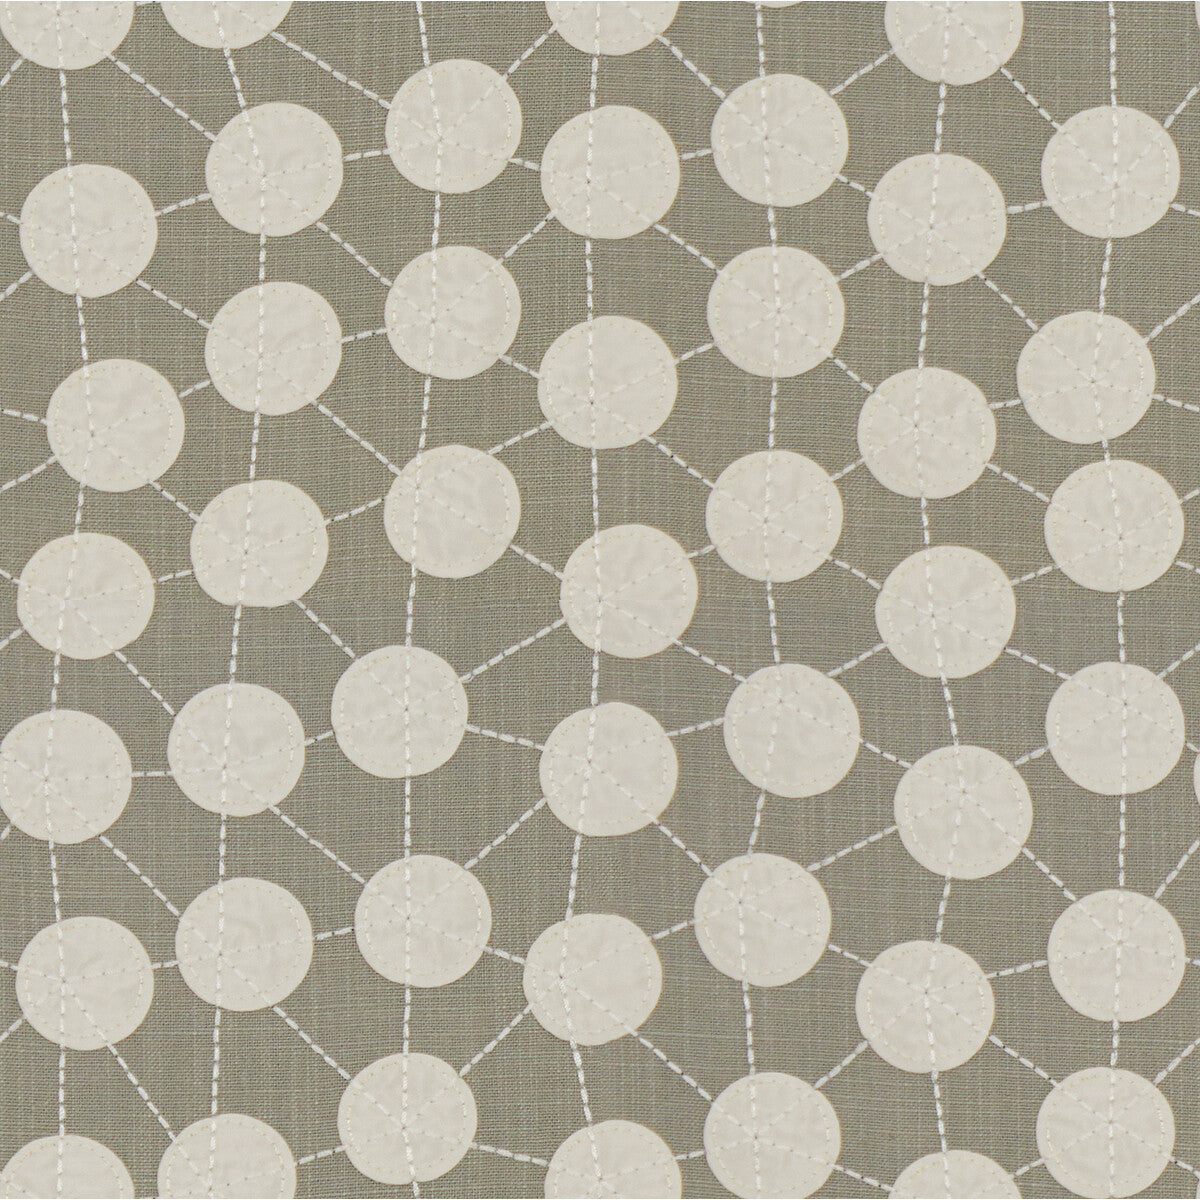 Goaround fabric in stone color - pattern 4242.11.0 - by Kravet Design